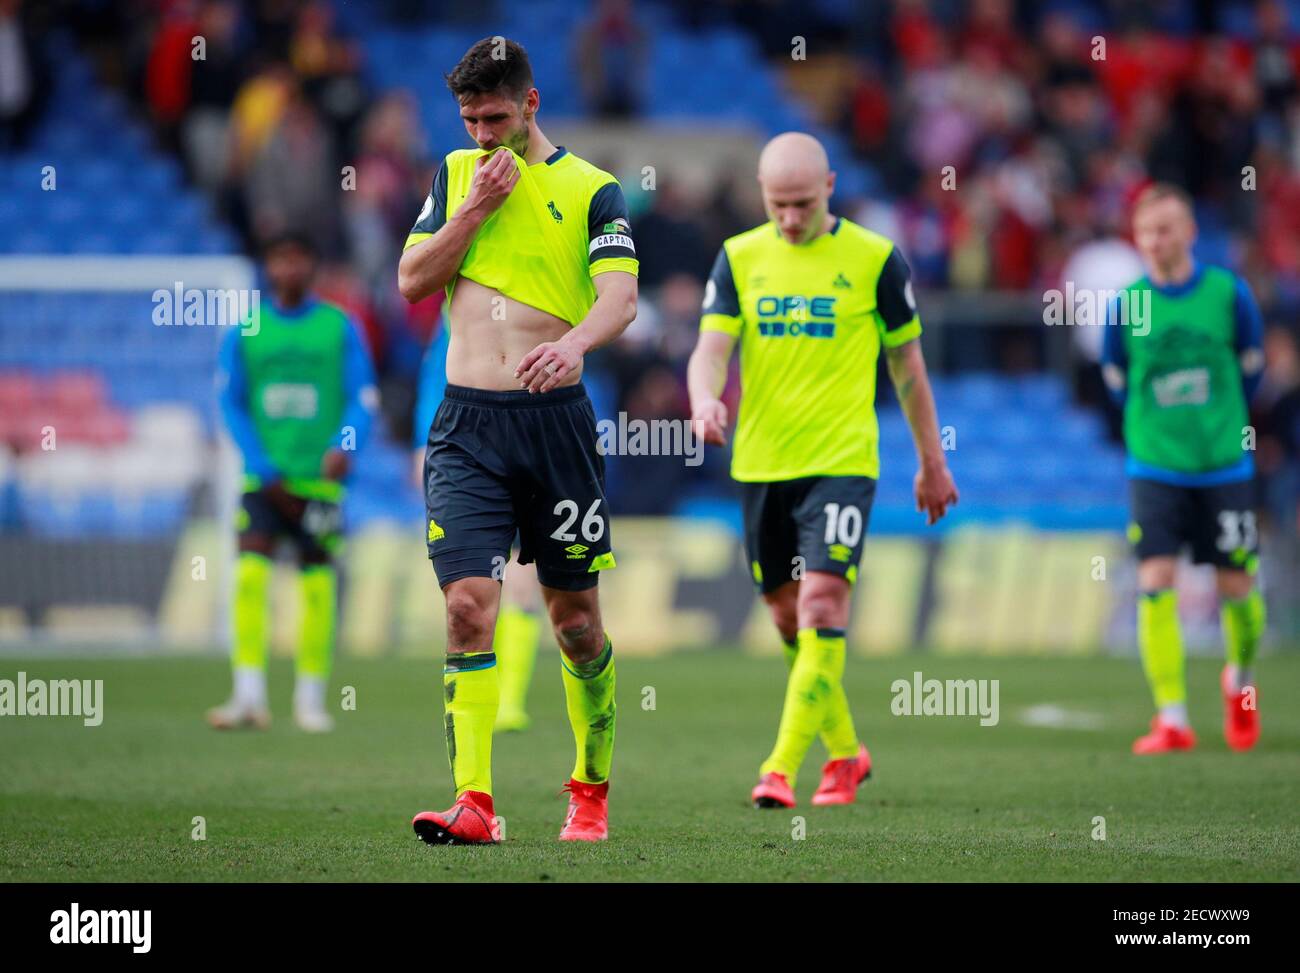 Soccer Football - Premier League - Crystal Palace v Huddersfield Town - Selhurst Park, London, Britain - March 30, 2019  Huddersfield Town's Christopher Schindler and Aaron Mooy look dejected after the match as they are relegated from the Premier League   Action Images via Reuters/Andrew Couldridge  EDITORIAL USE ONLY. No use with unauthorized audio, video, data, fixture lists, club/league logos or 'live' services. Online in-match use limited to 75 images, no video emulation. No use in betting, games or single club/league/player publications.  Please contact your account representative for fur Stock Photo